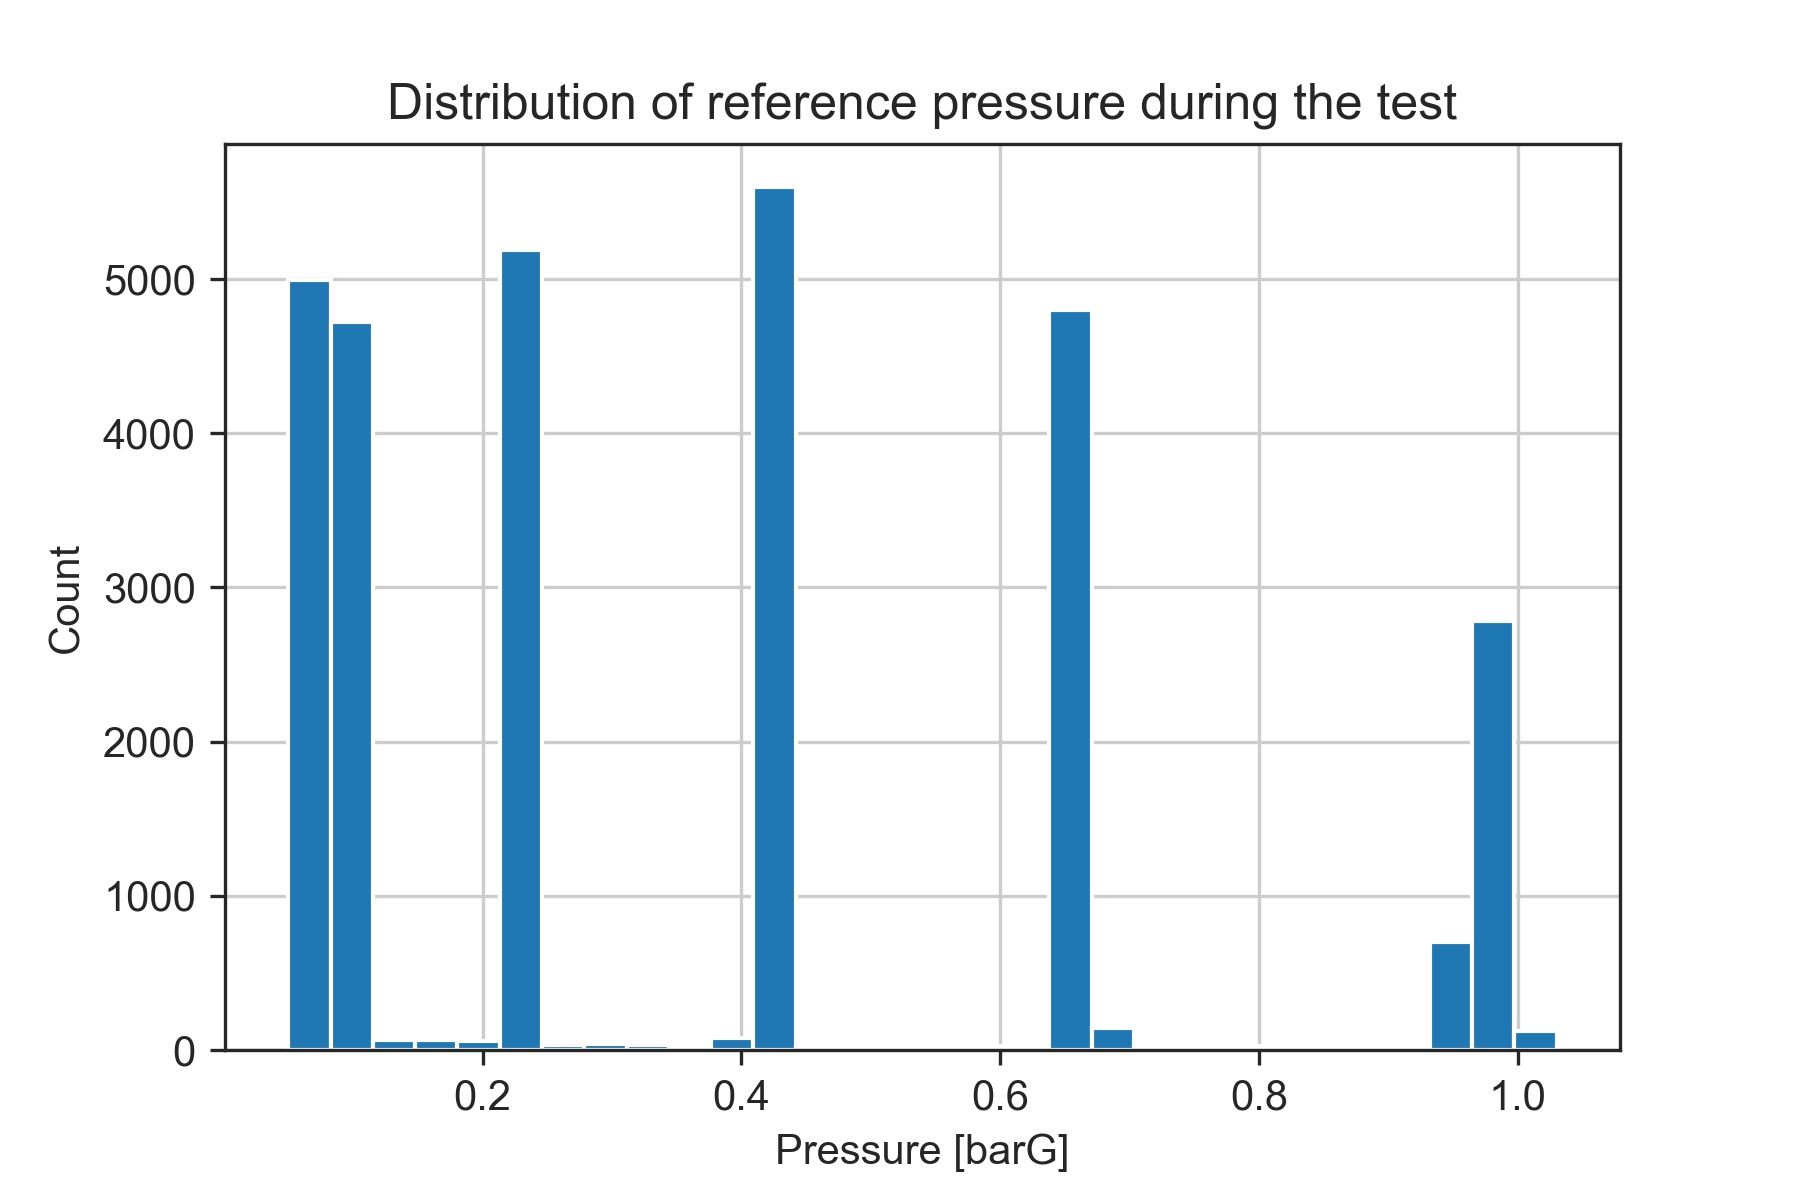 Histogram of pressure values. There are 6 bins that stand out, representing the pressure intervals with the highest count of samples. They correspond to the test points shown in the previous figure.